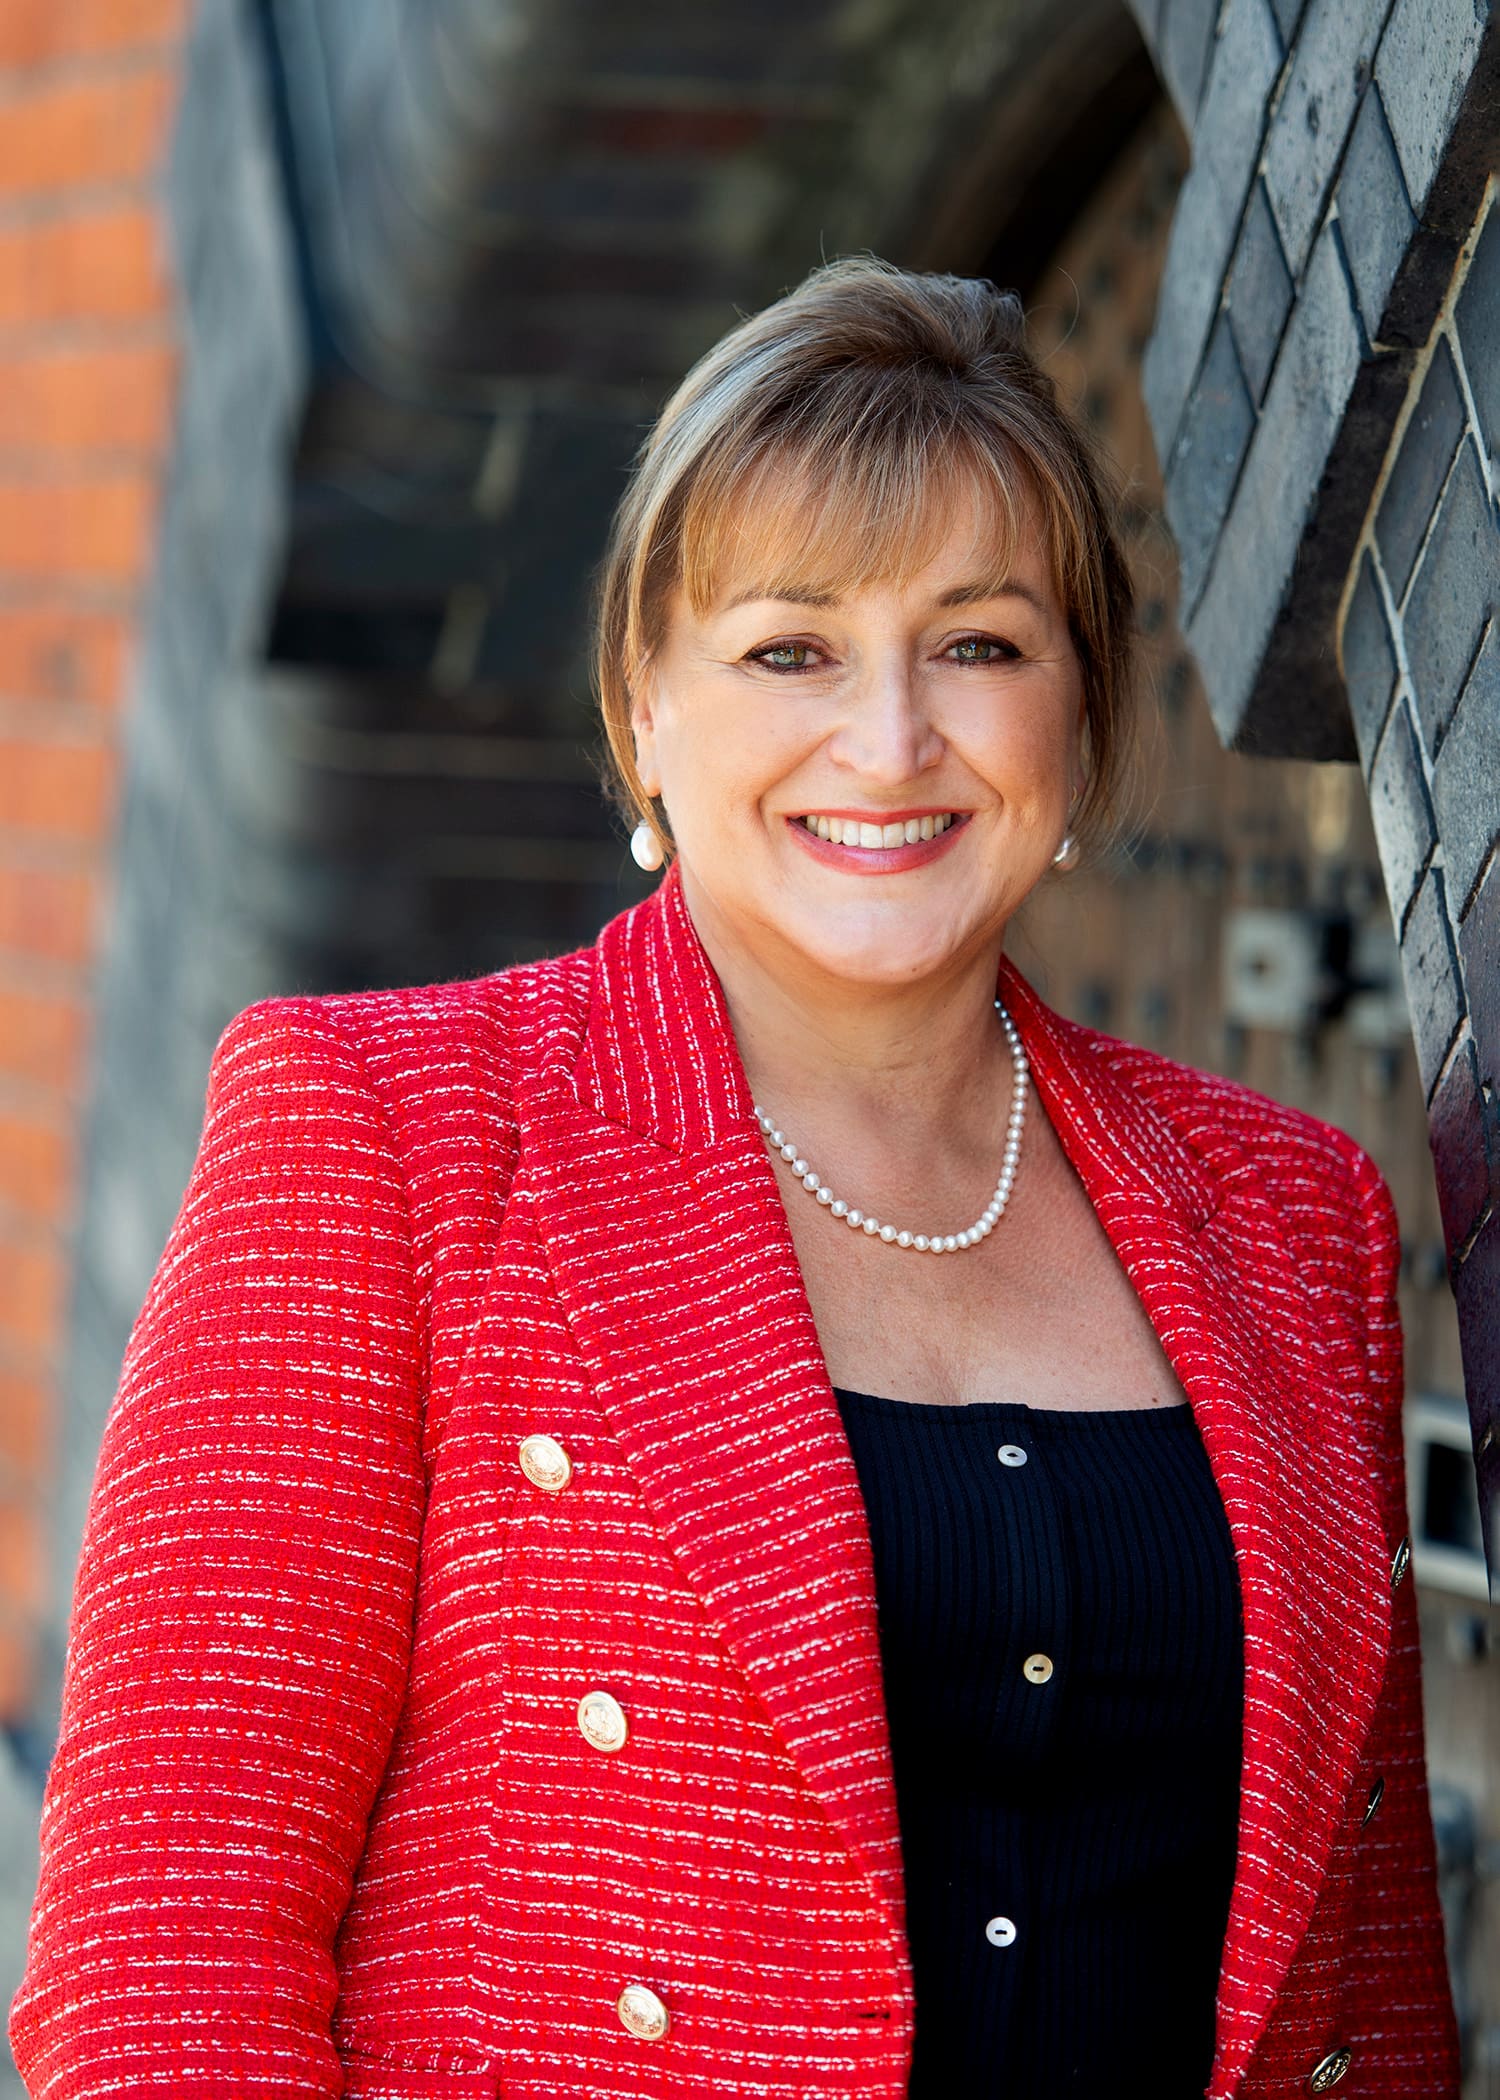 Jane Johnson is an Estate Agent in Hampshire